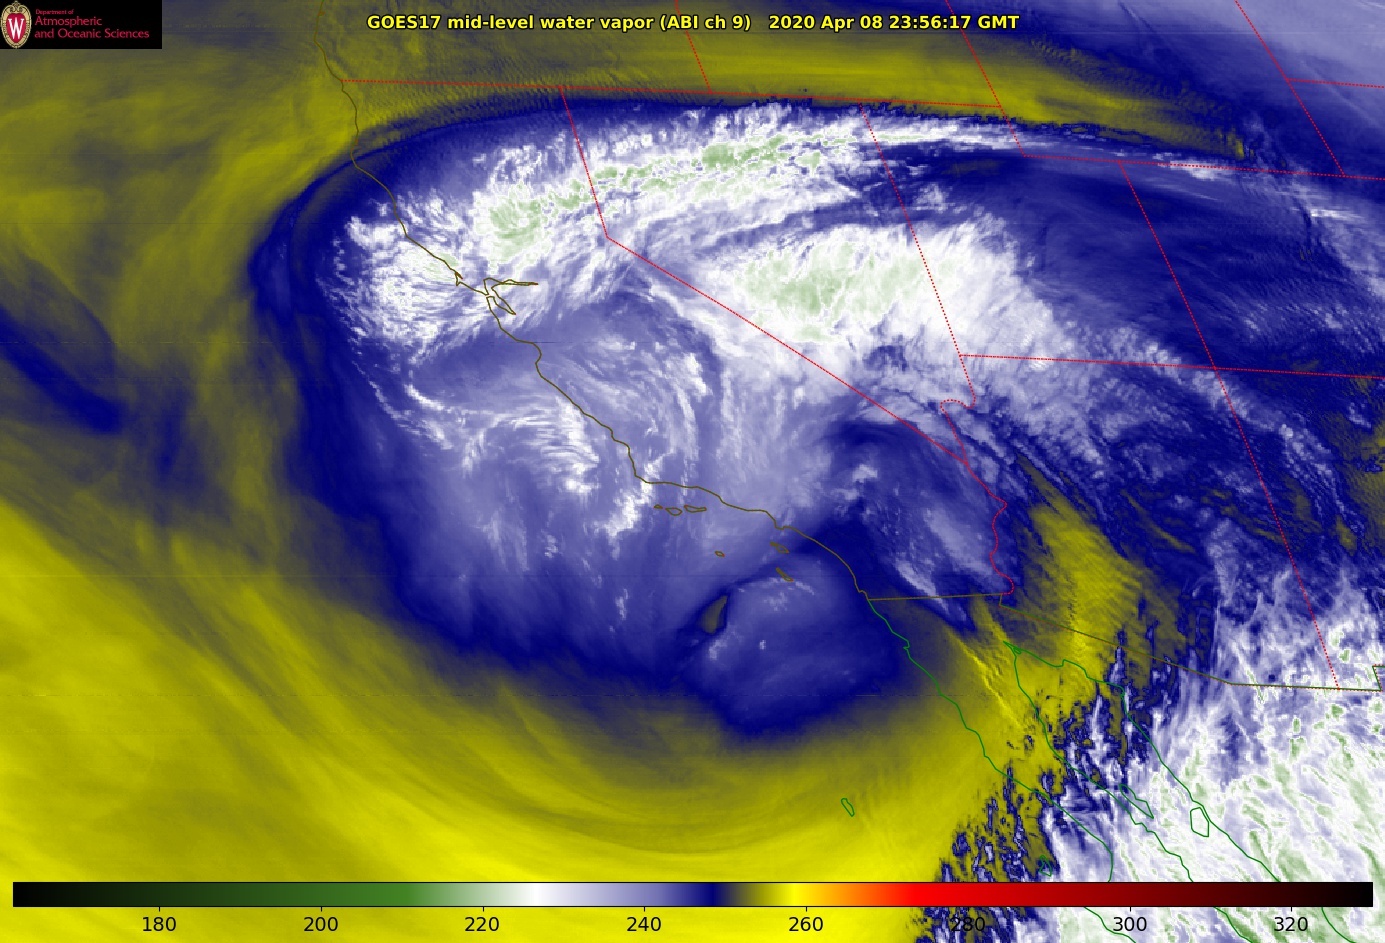 GOES-17 Mid-level Water Vapor (6.9 µm) images [click to play animation | MP4]